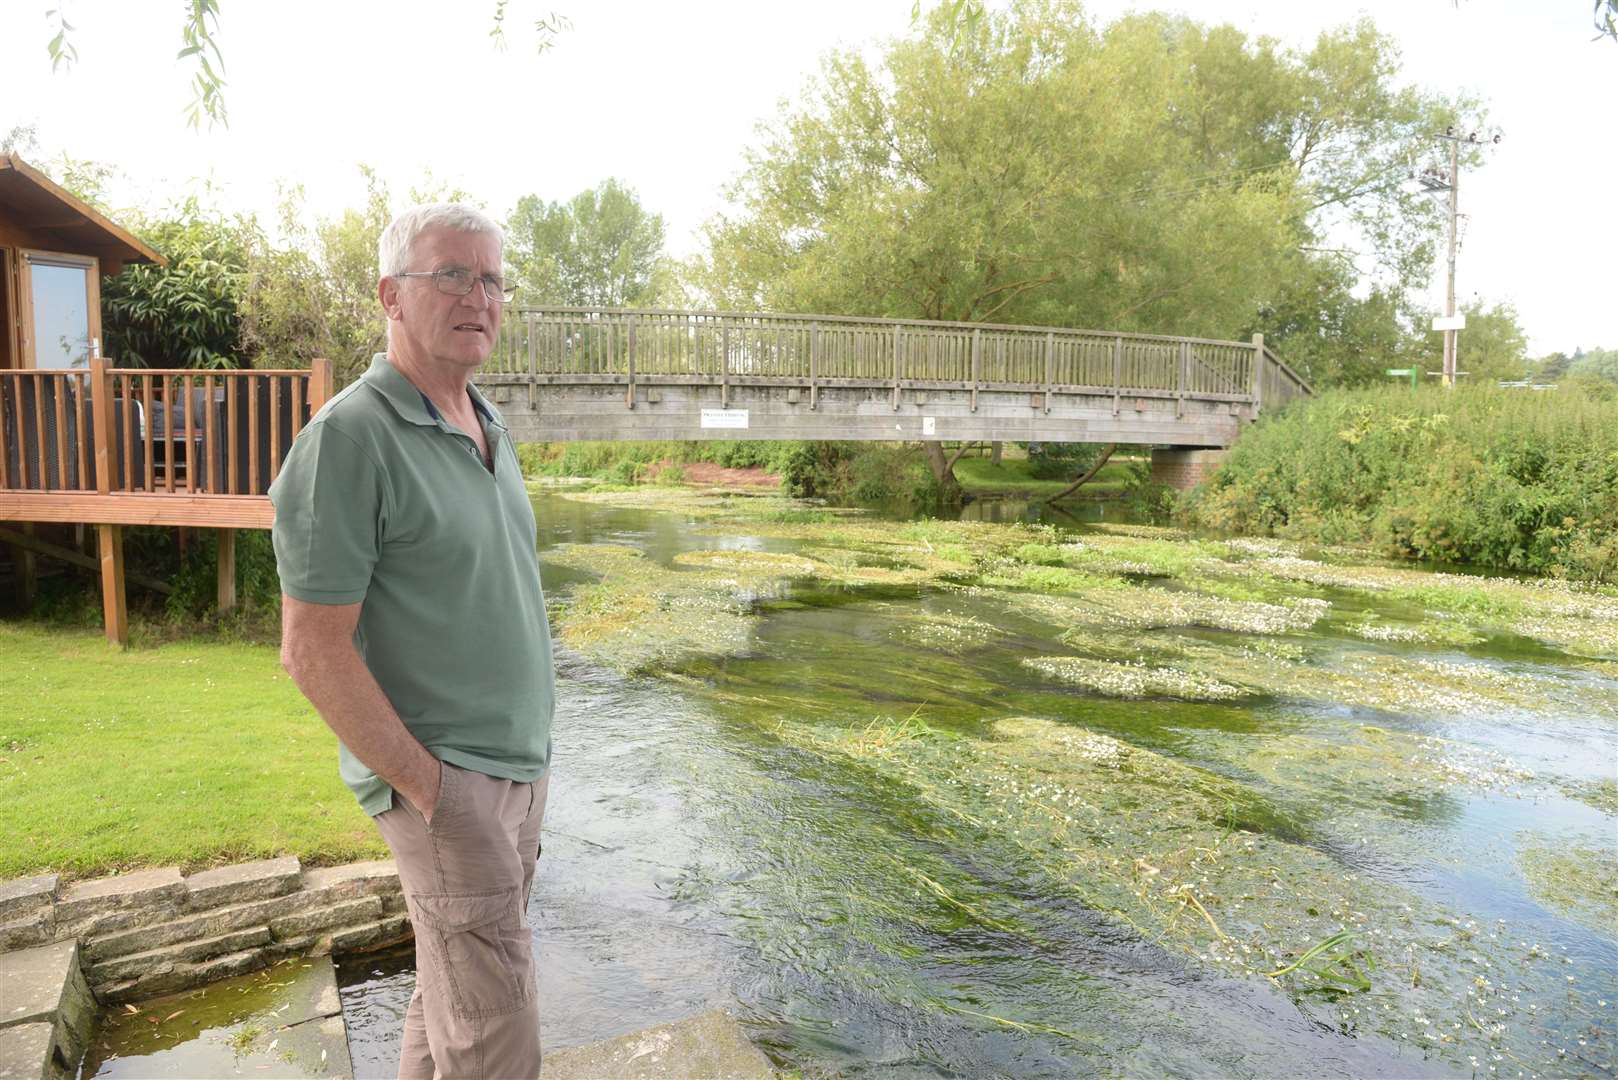 Chris Sparks by the River Stour in Tonford Lane where youths have attacked ducks